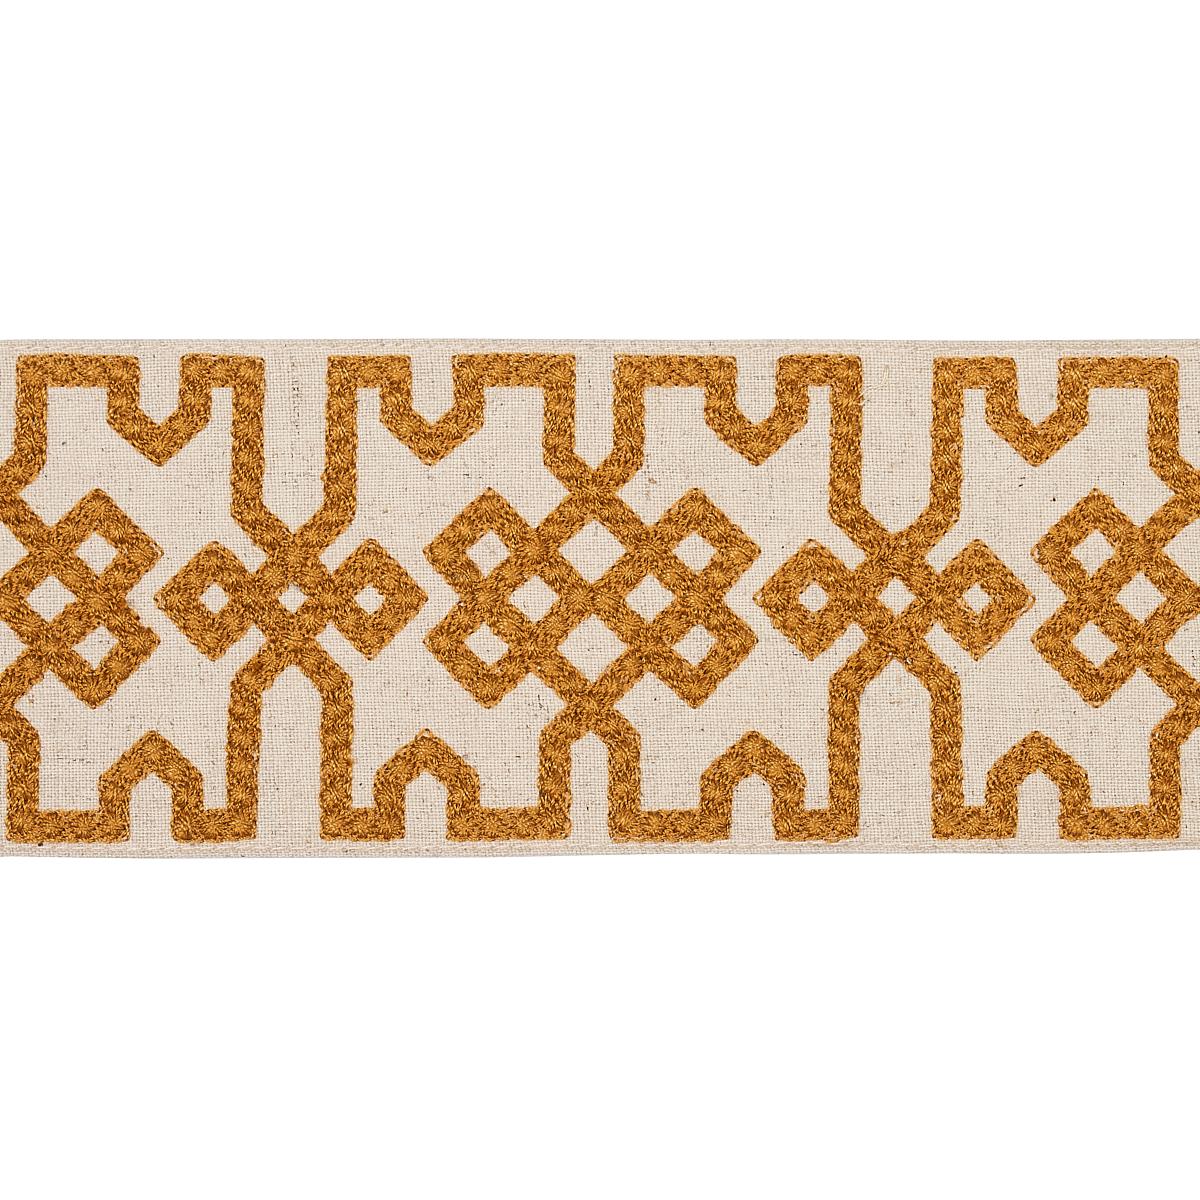 Knotted Trellis Tape_OCHER ON UNBLEACHED